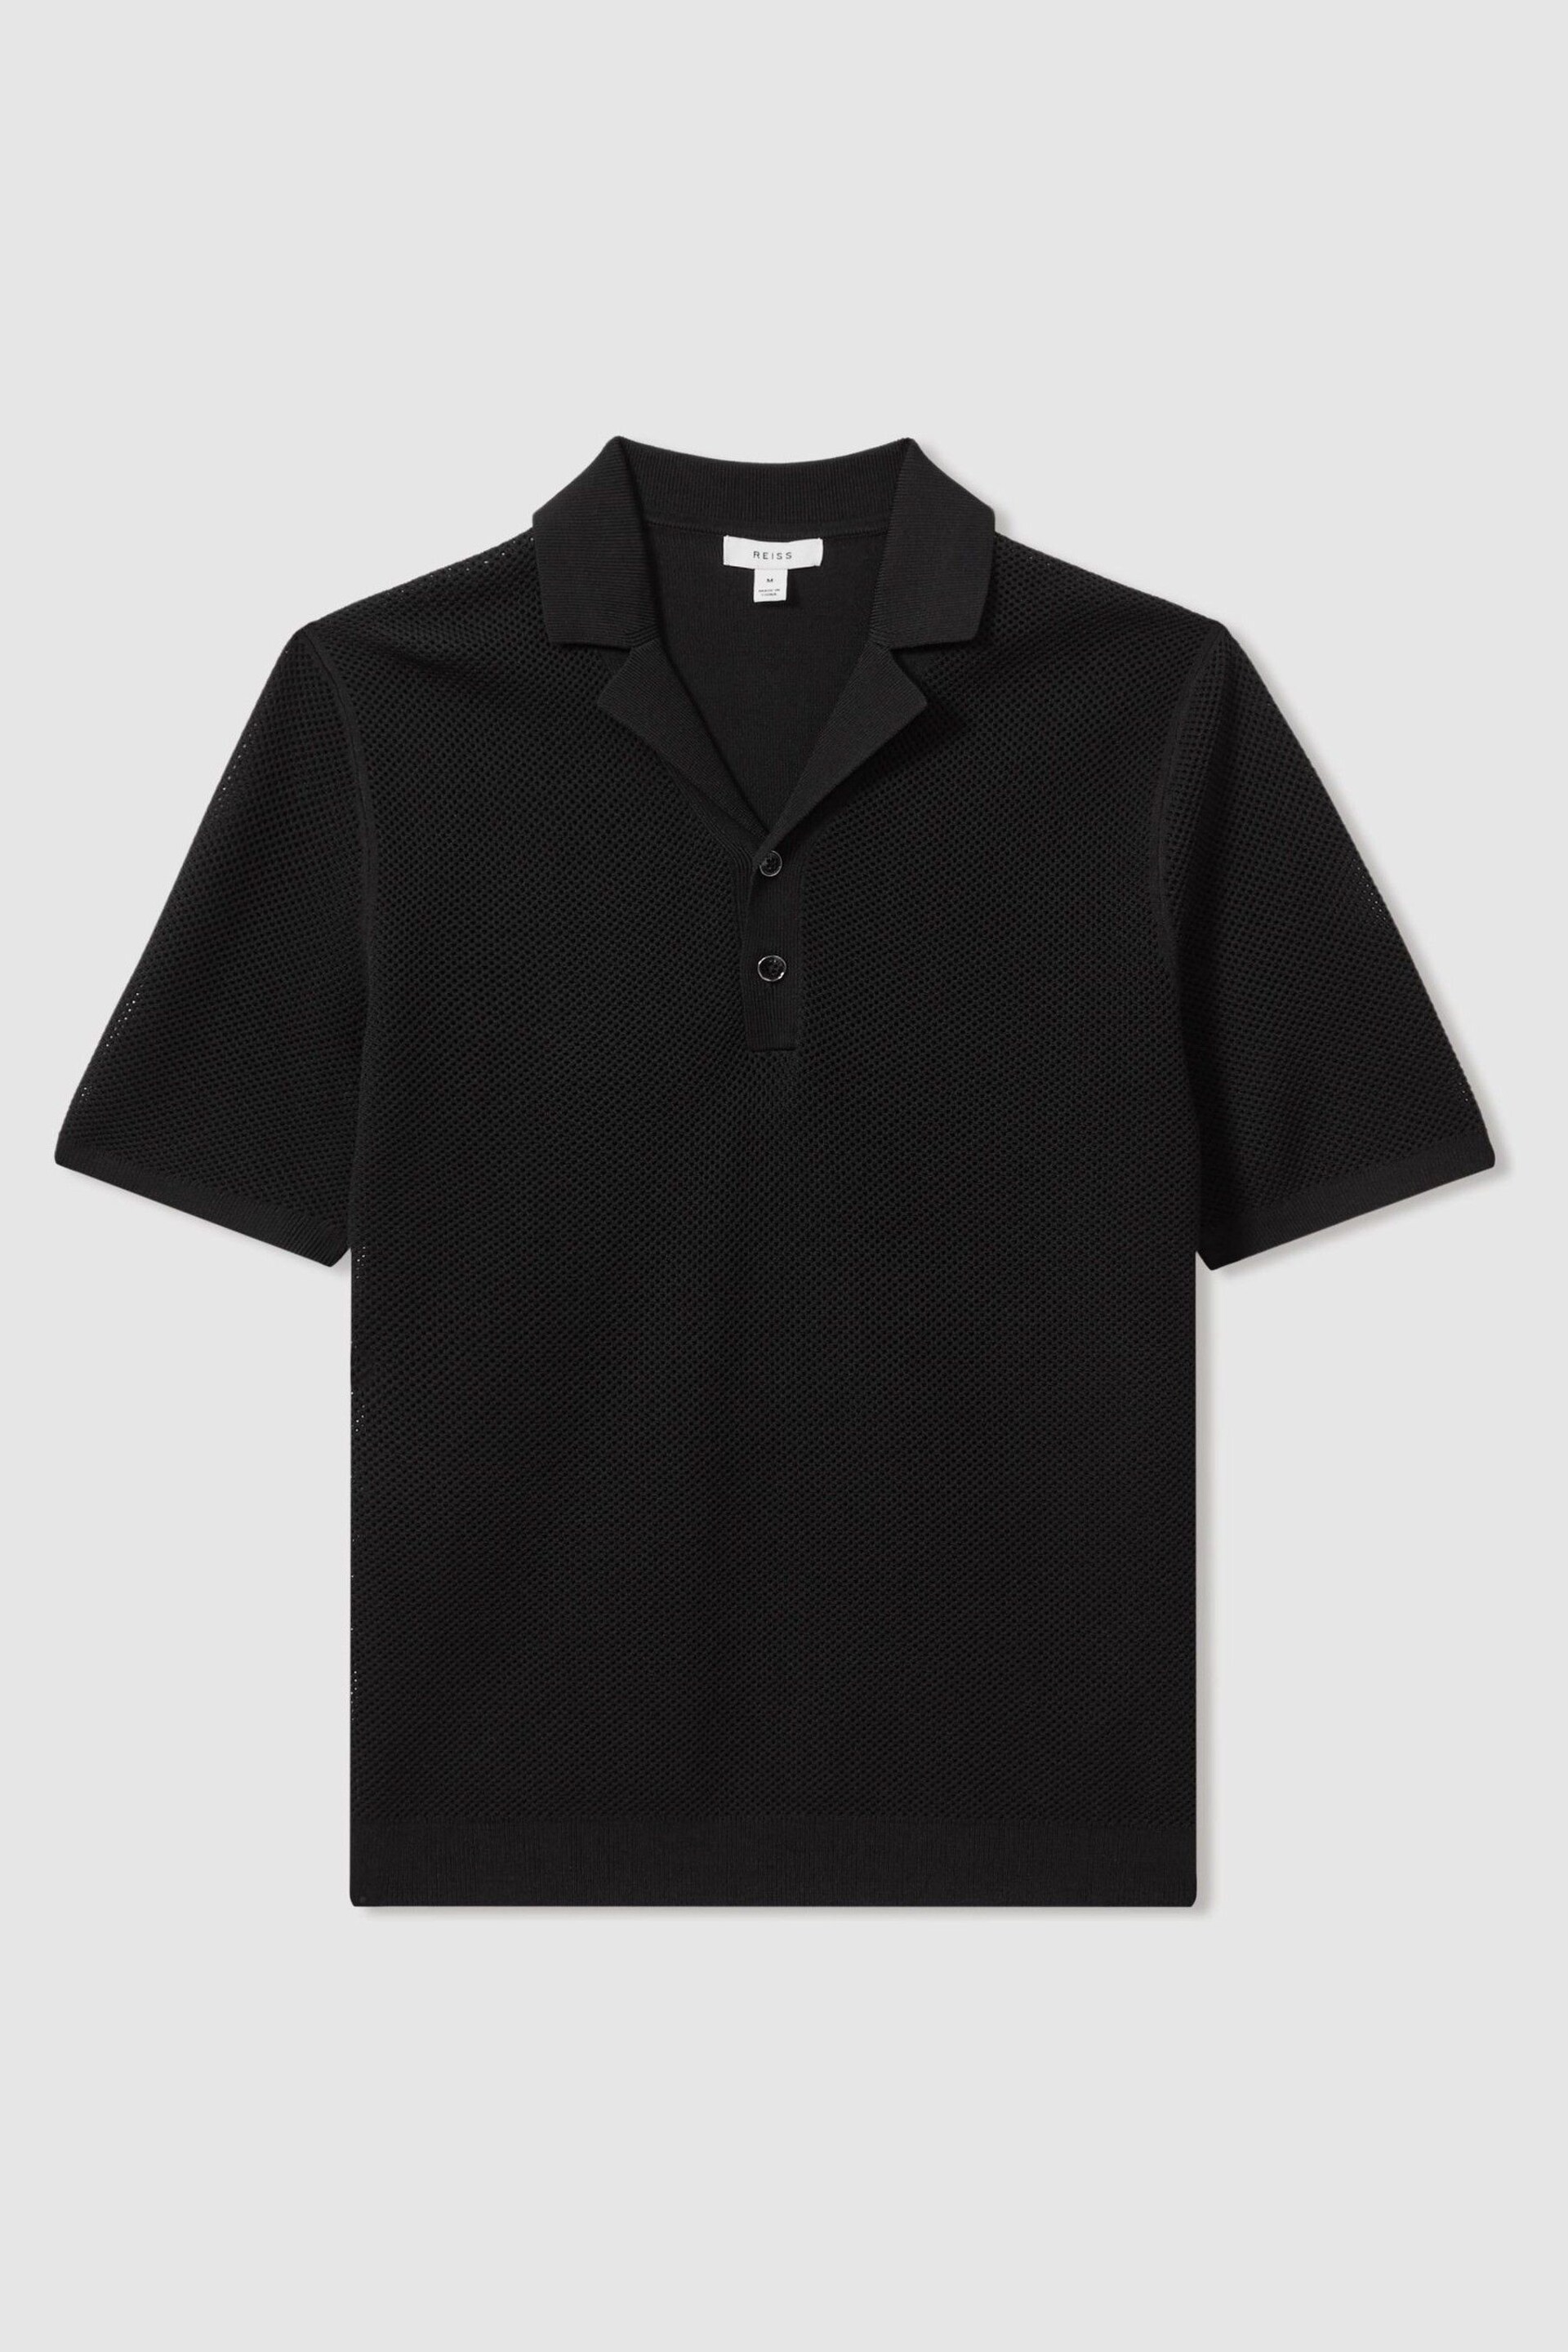 Reiss Black Charlie Open-Stitch Cuban-Collar Polo Shirt - Image 2 of 5